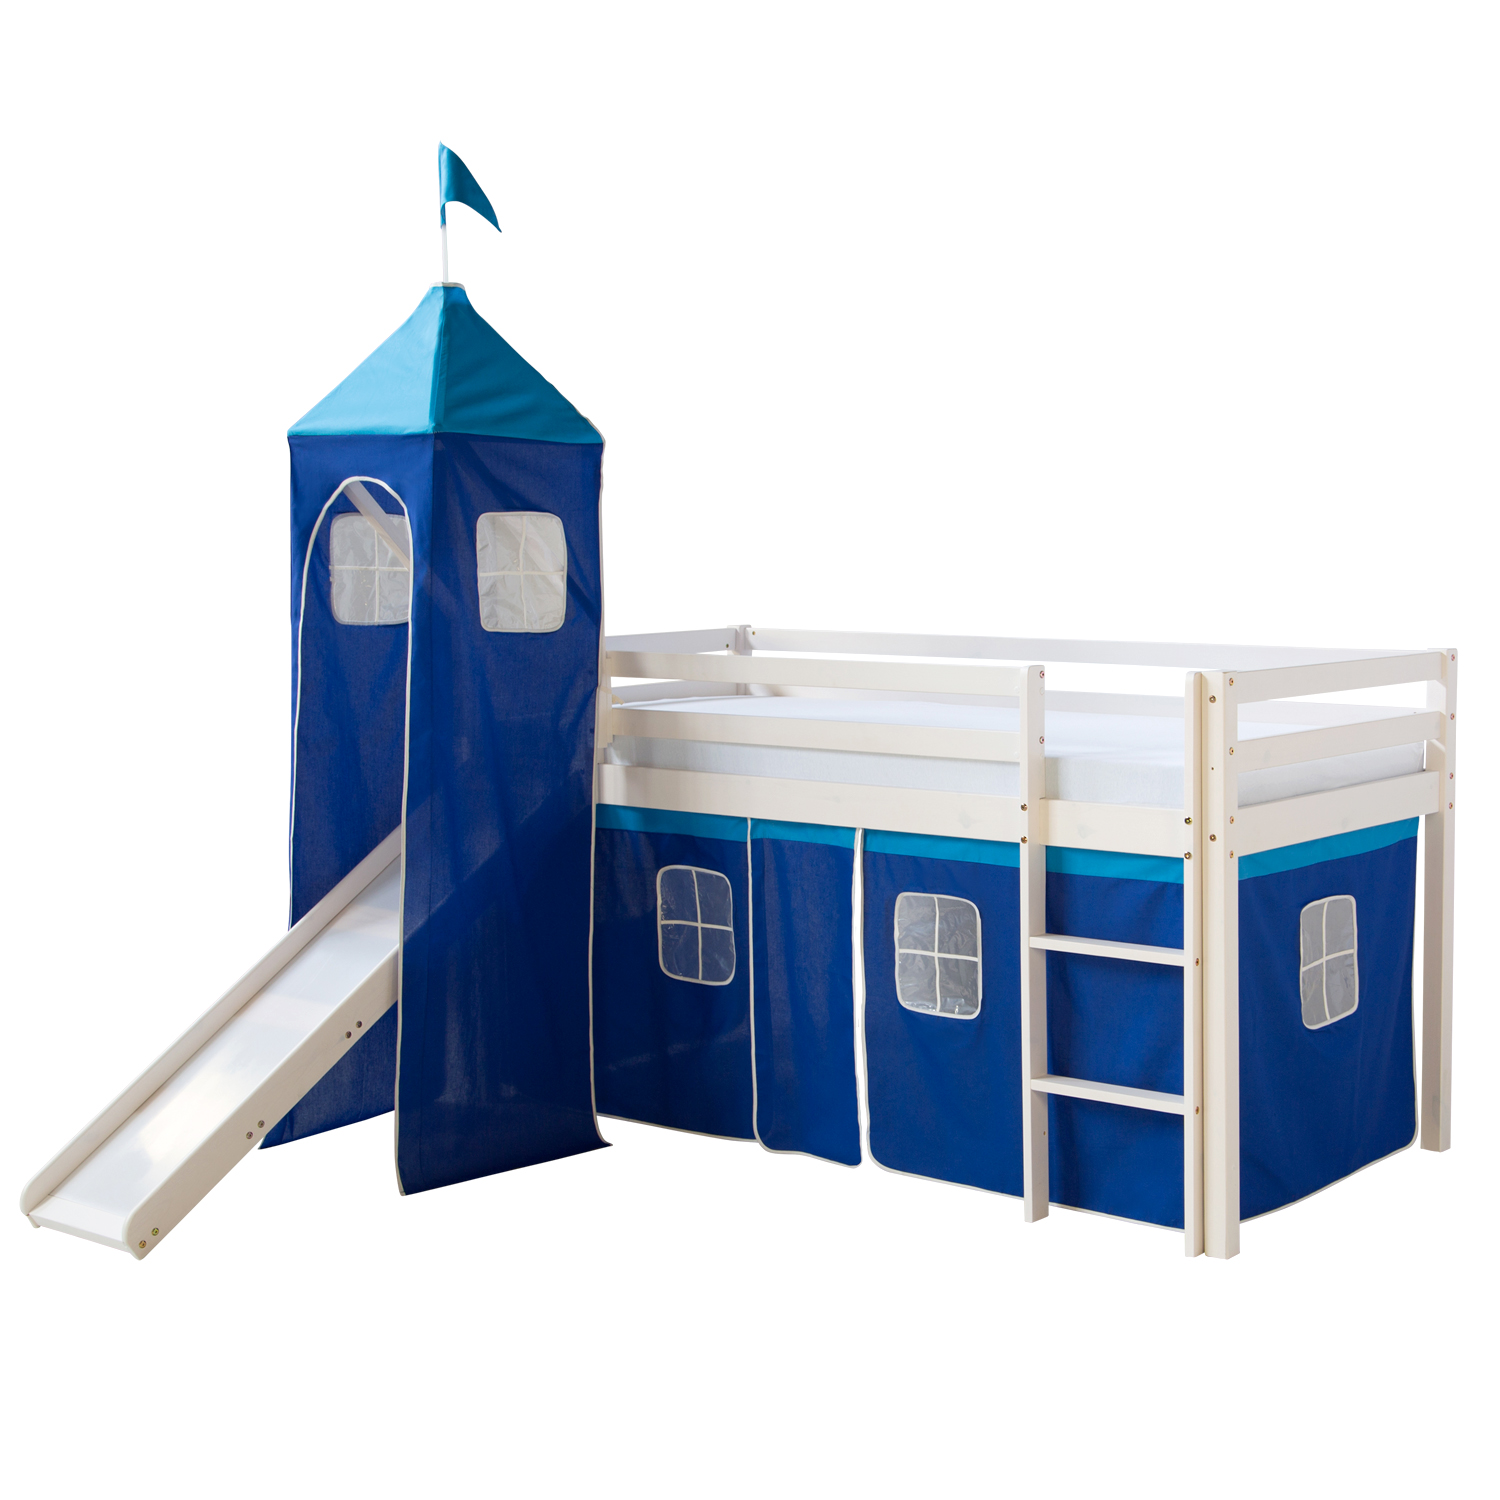 Loftbed with Slide 90x200 cm Tower Slats Bunk bed Childrens bed Solid Pine Wood Curtain Blue